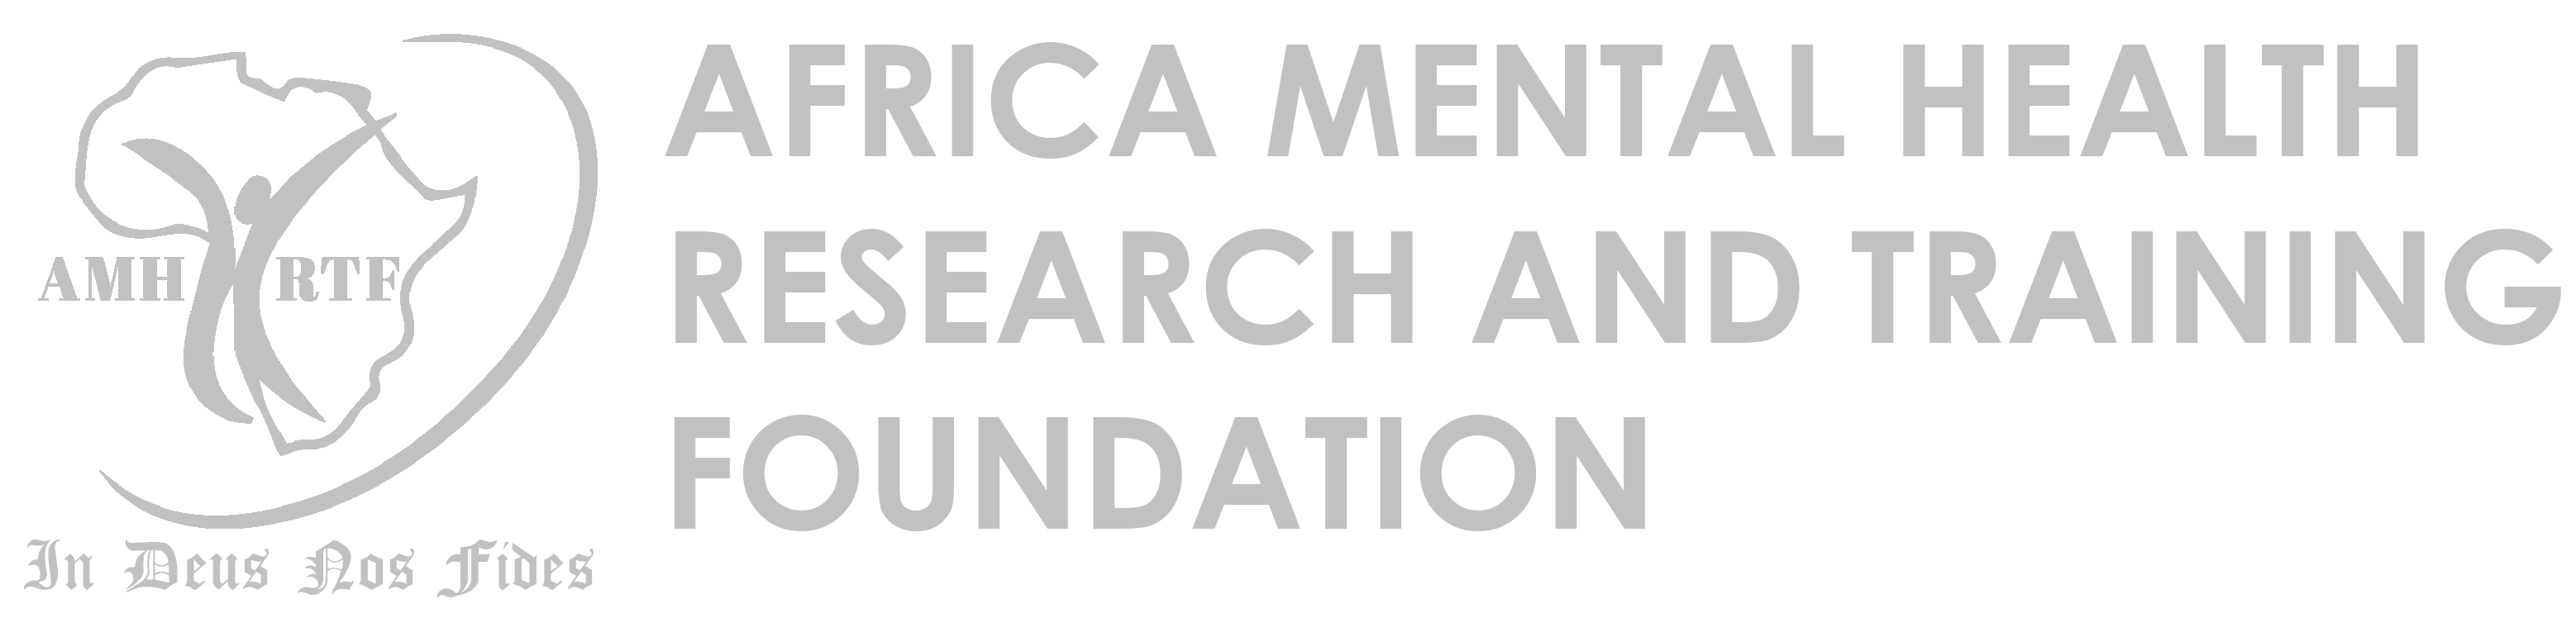 Africa Mental Health Research and Training Foundation